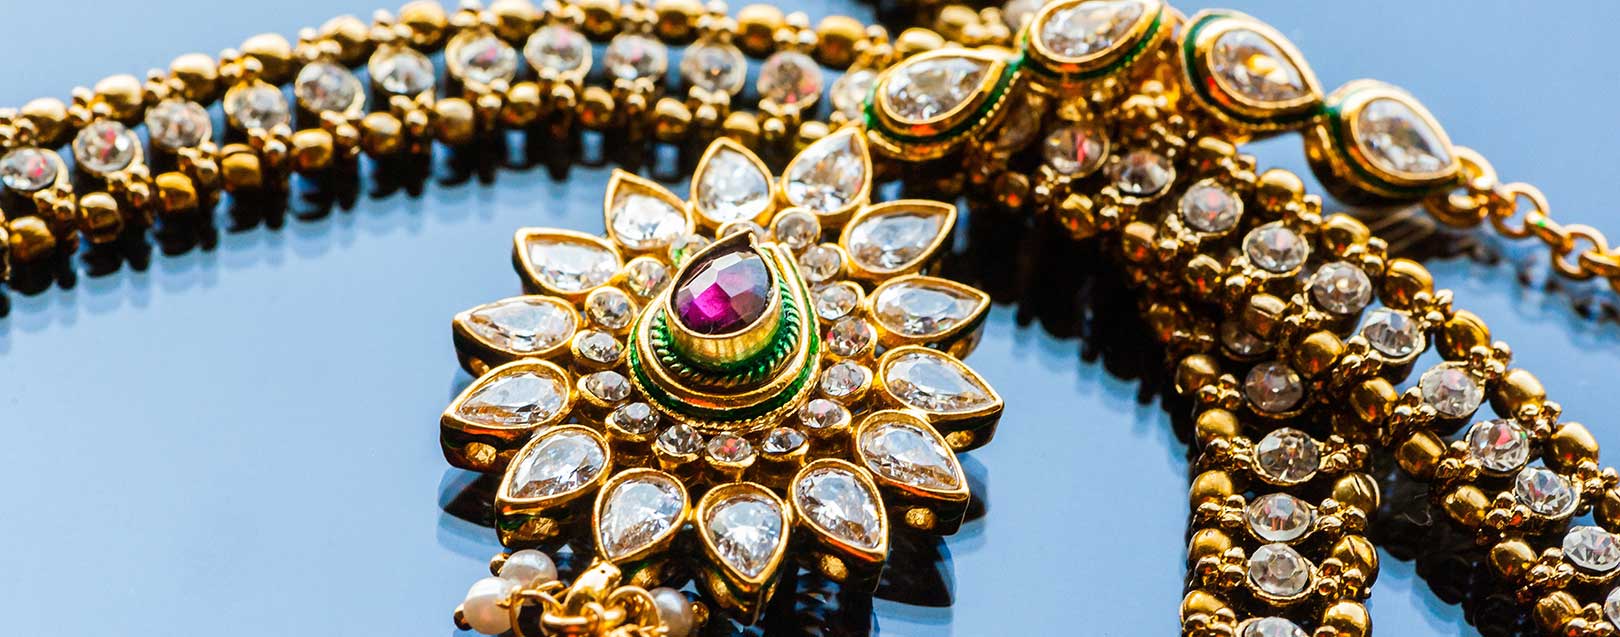 Exports of gems and jewellery likely to touch $60 bn by 2022, GJEPC